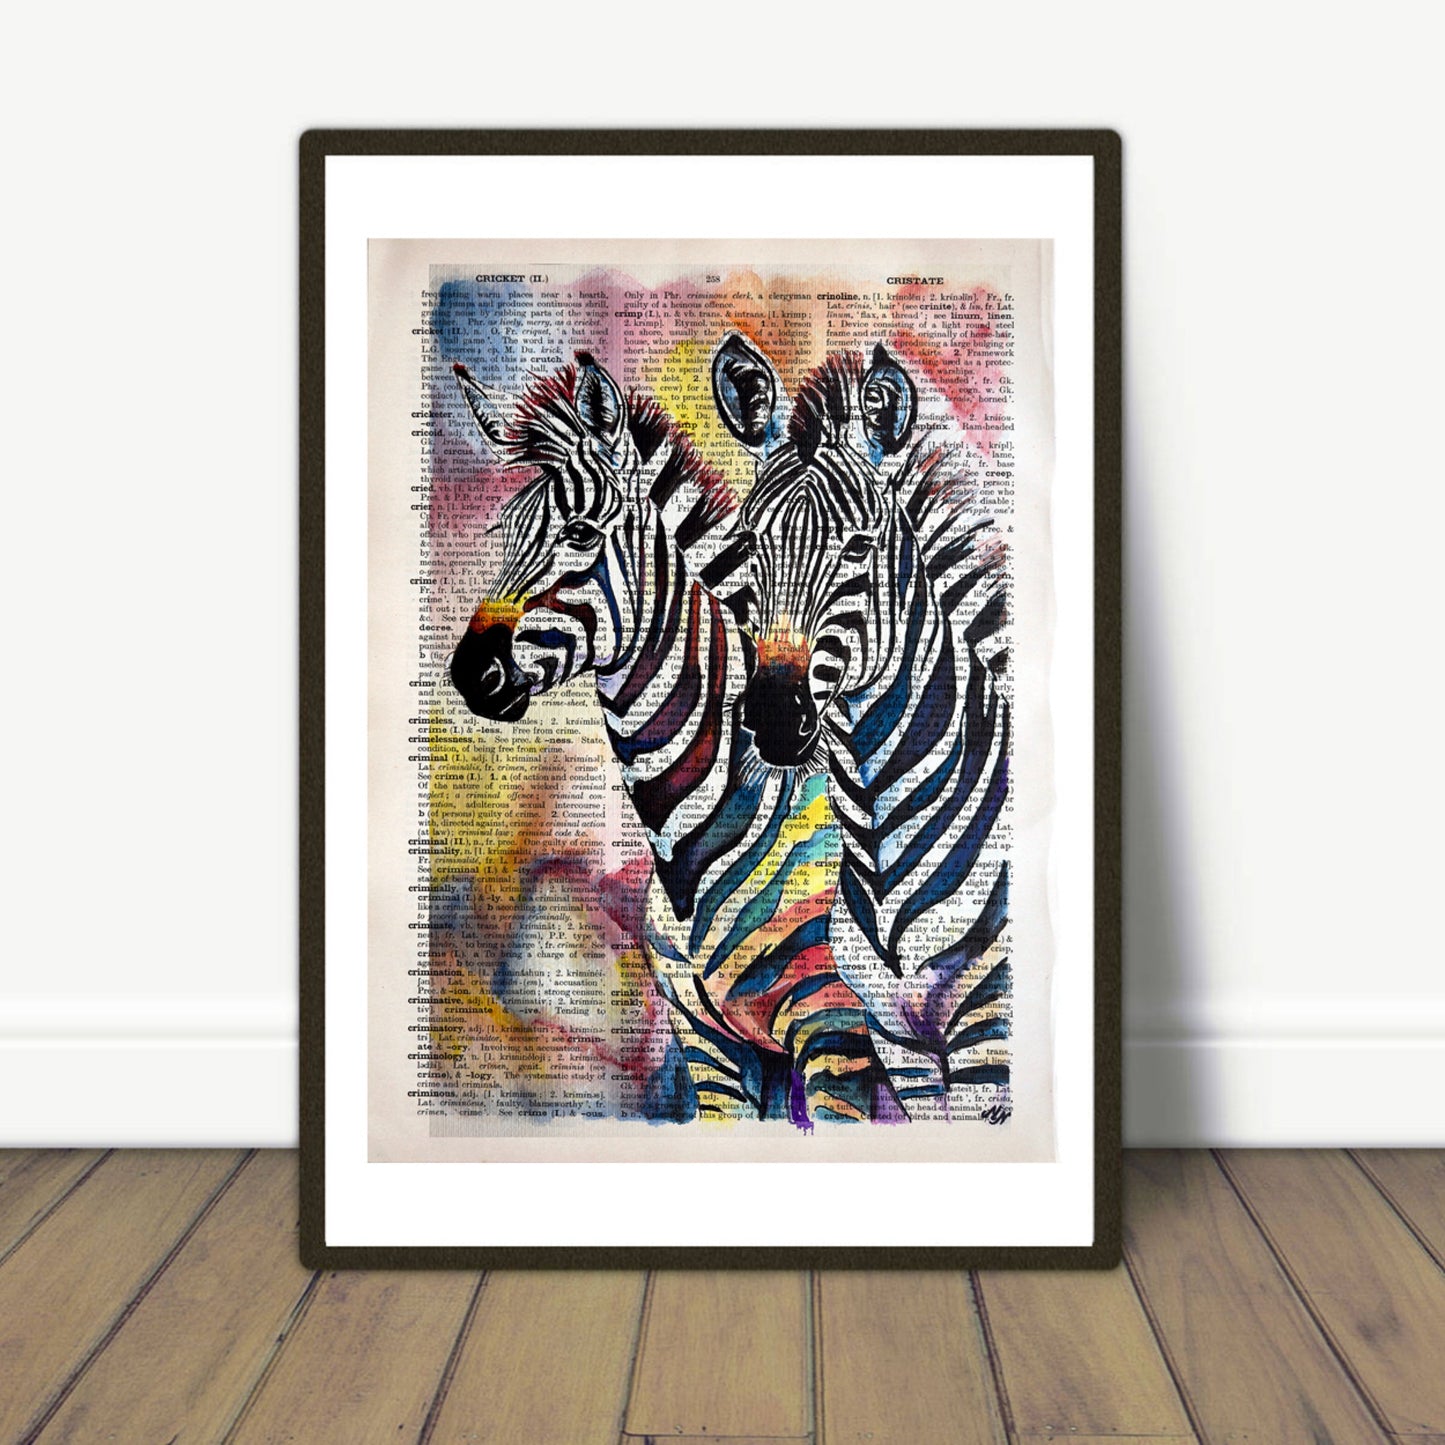 Misty Lady's "Joyful Zebras" digital art on an upcycled 1930s English dictionary page, blending whimsy and vintage charm.